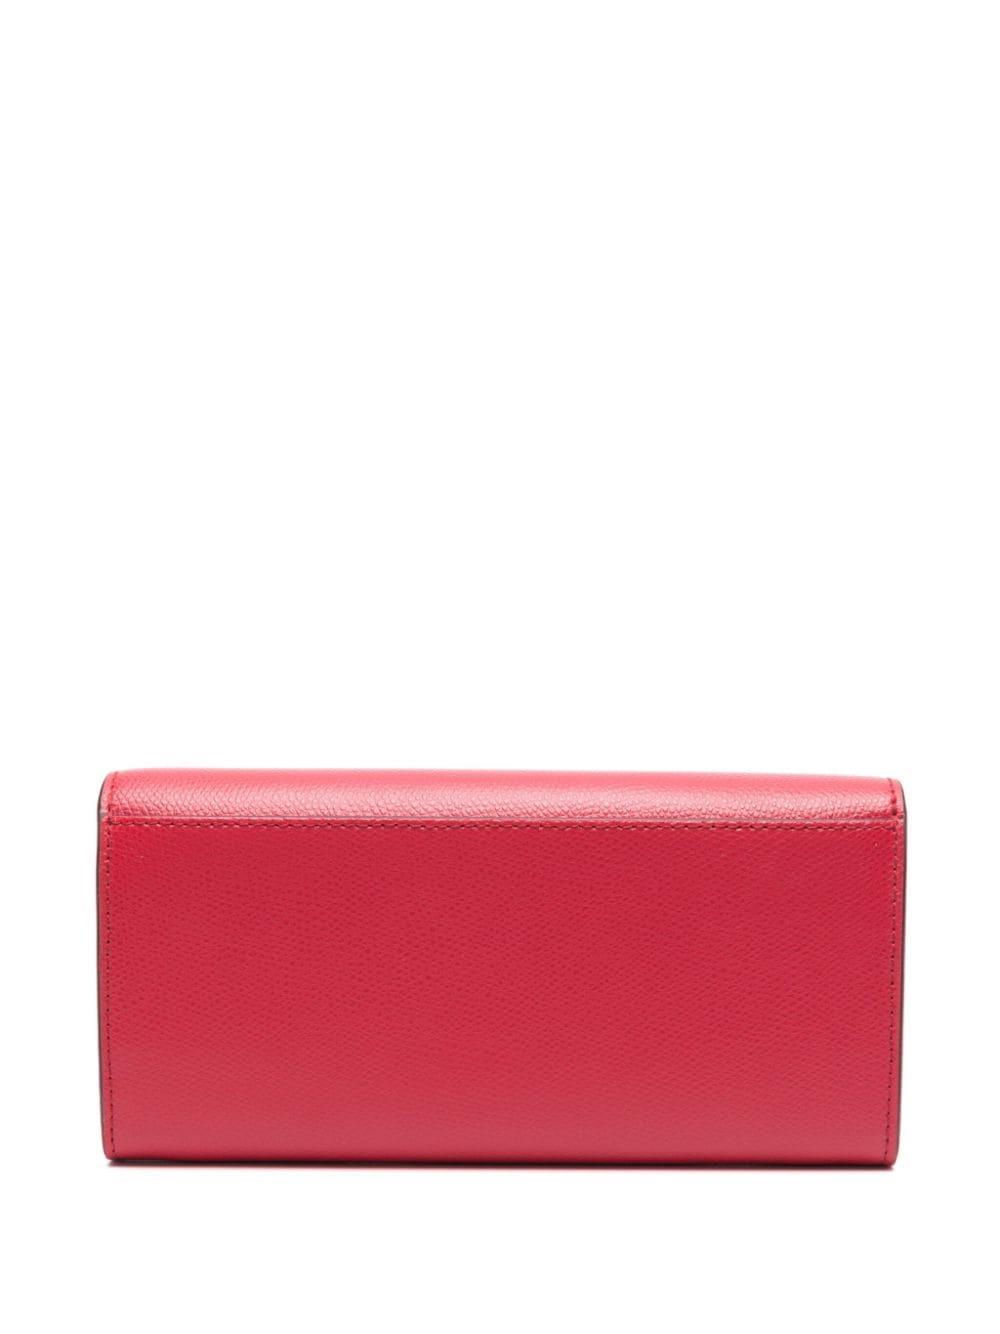 Furla Camelia continental leather wallet - Red